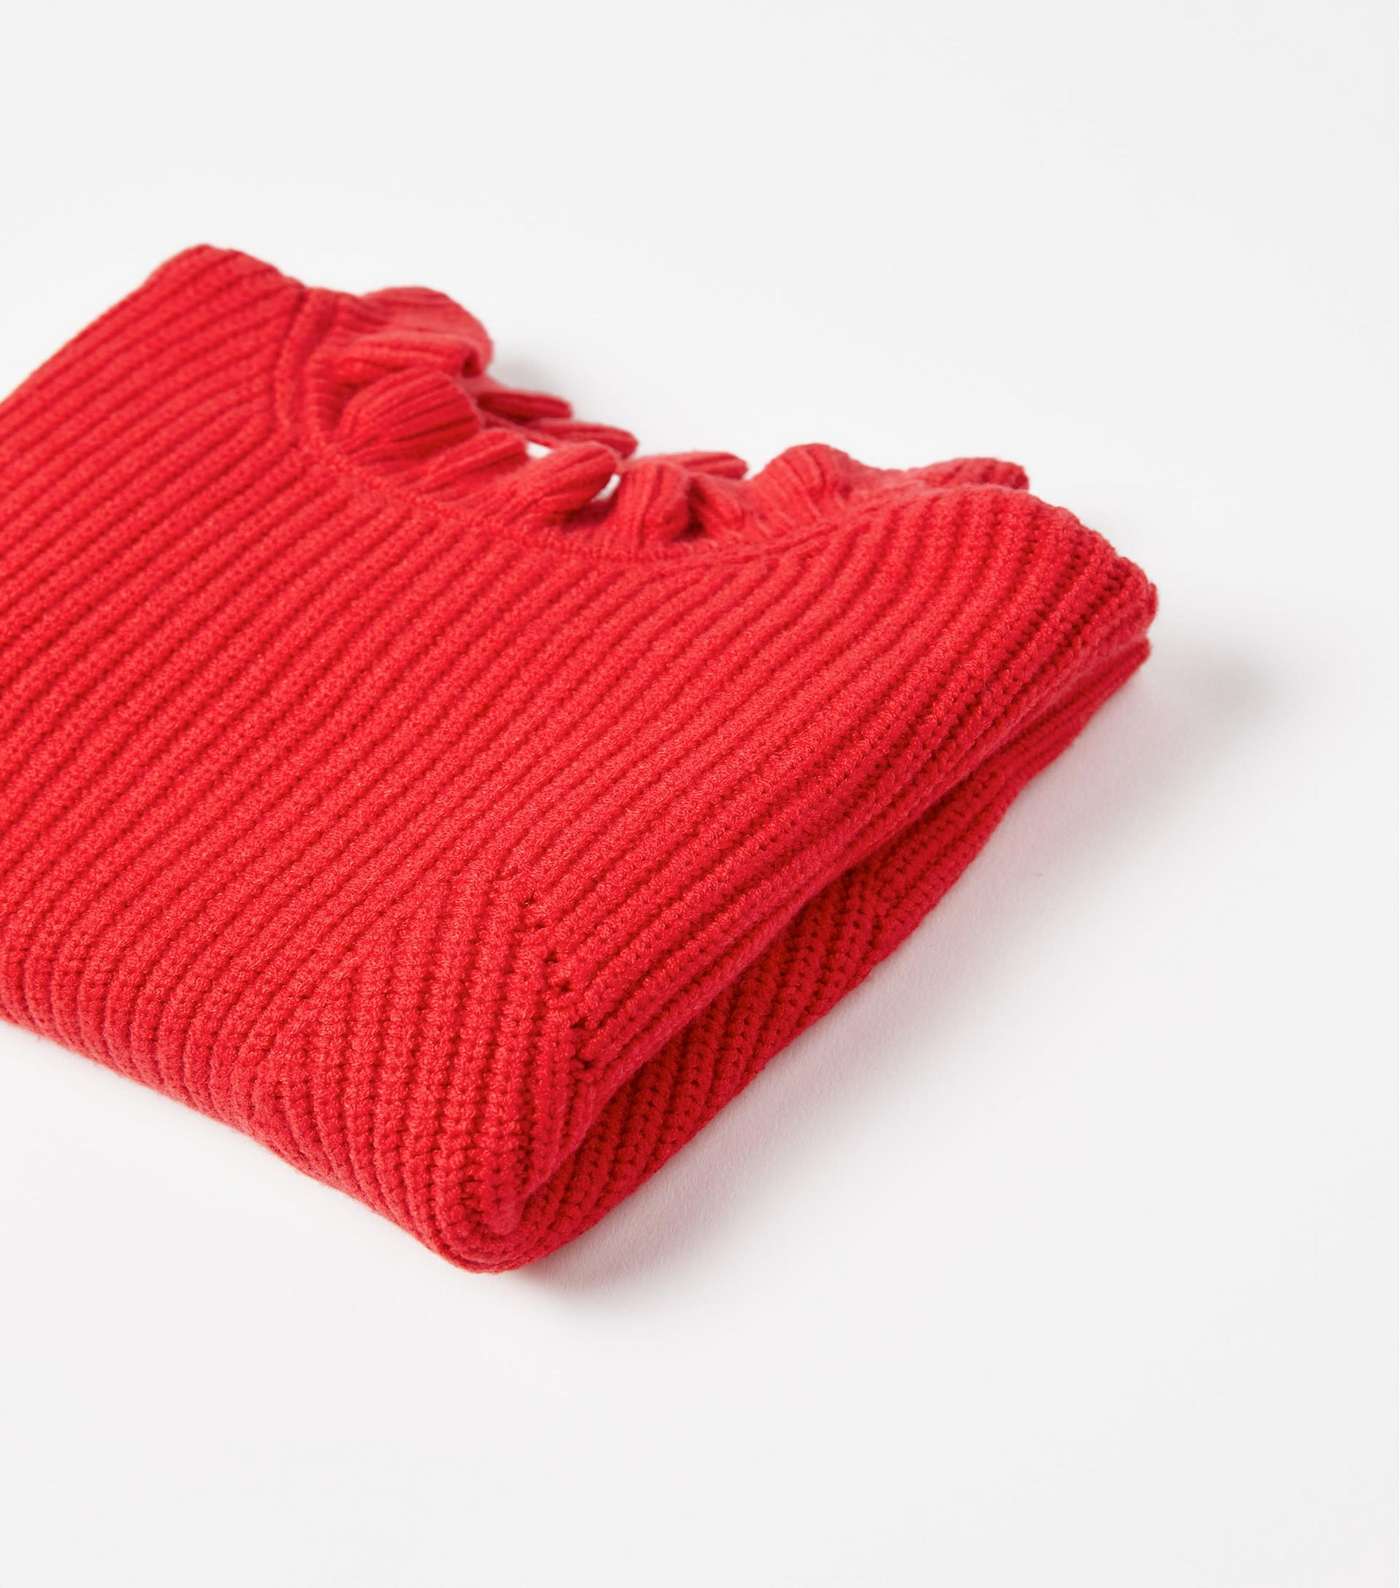 Zippy Red Chunky Knit High Neck Jumper Image 4